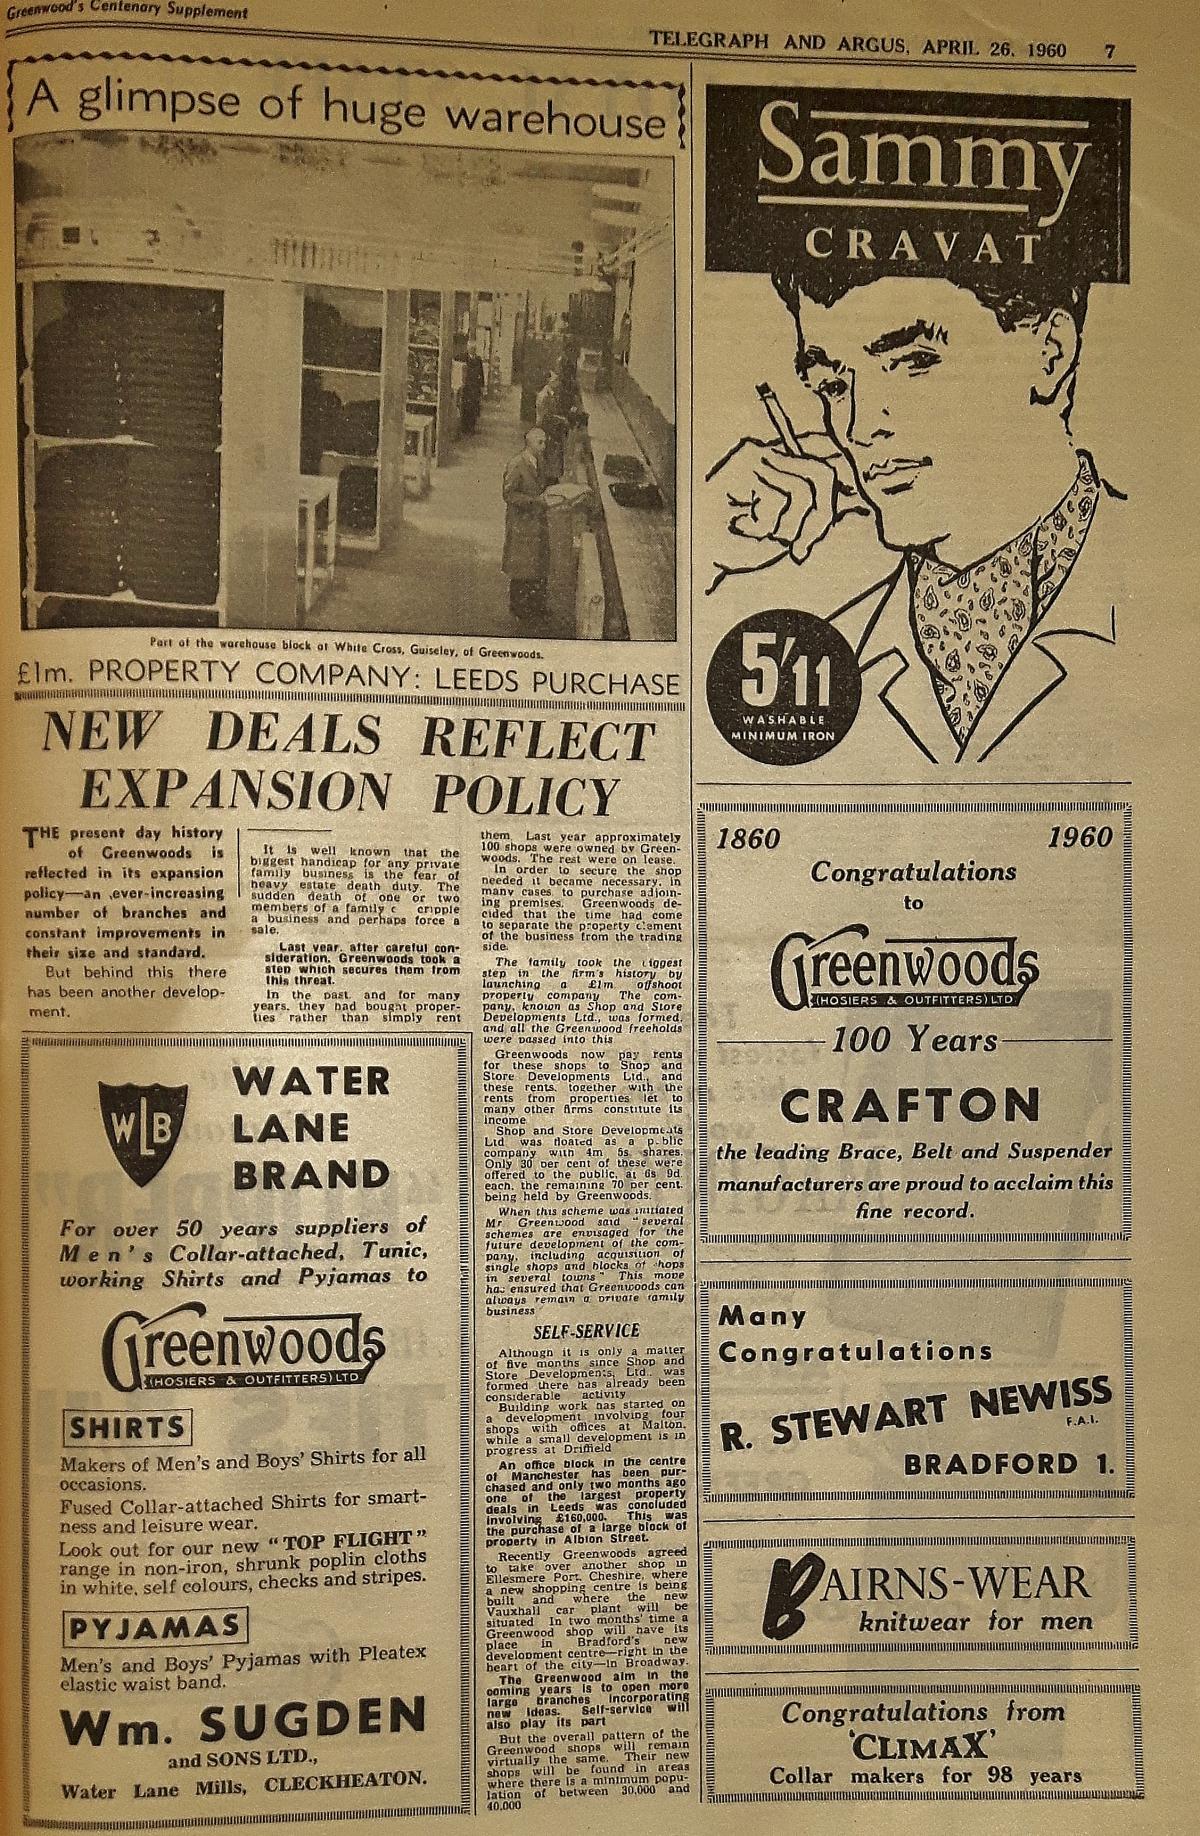 Greenwoods Centenary supplement 26 April 1960 page 7